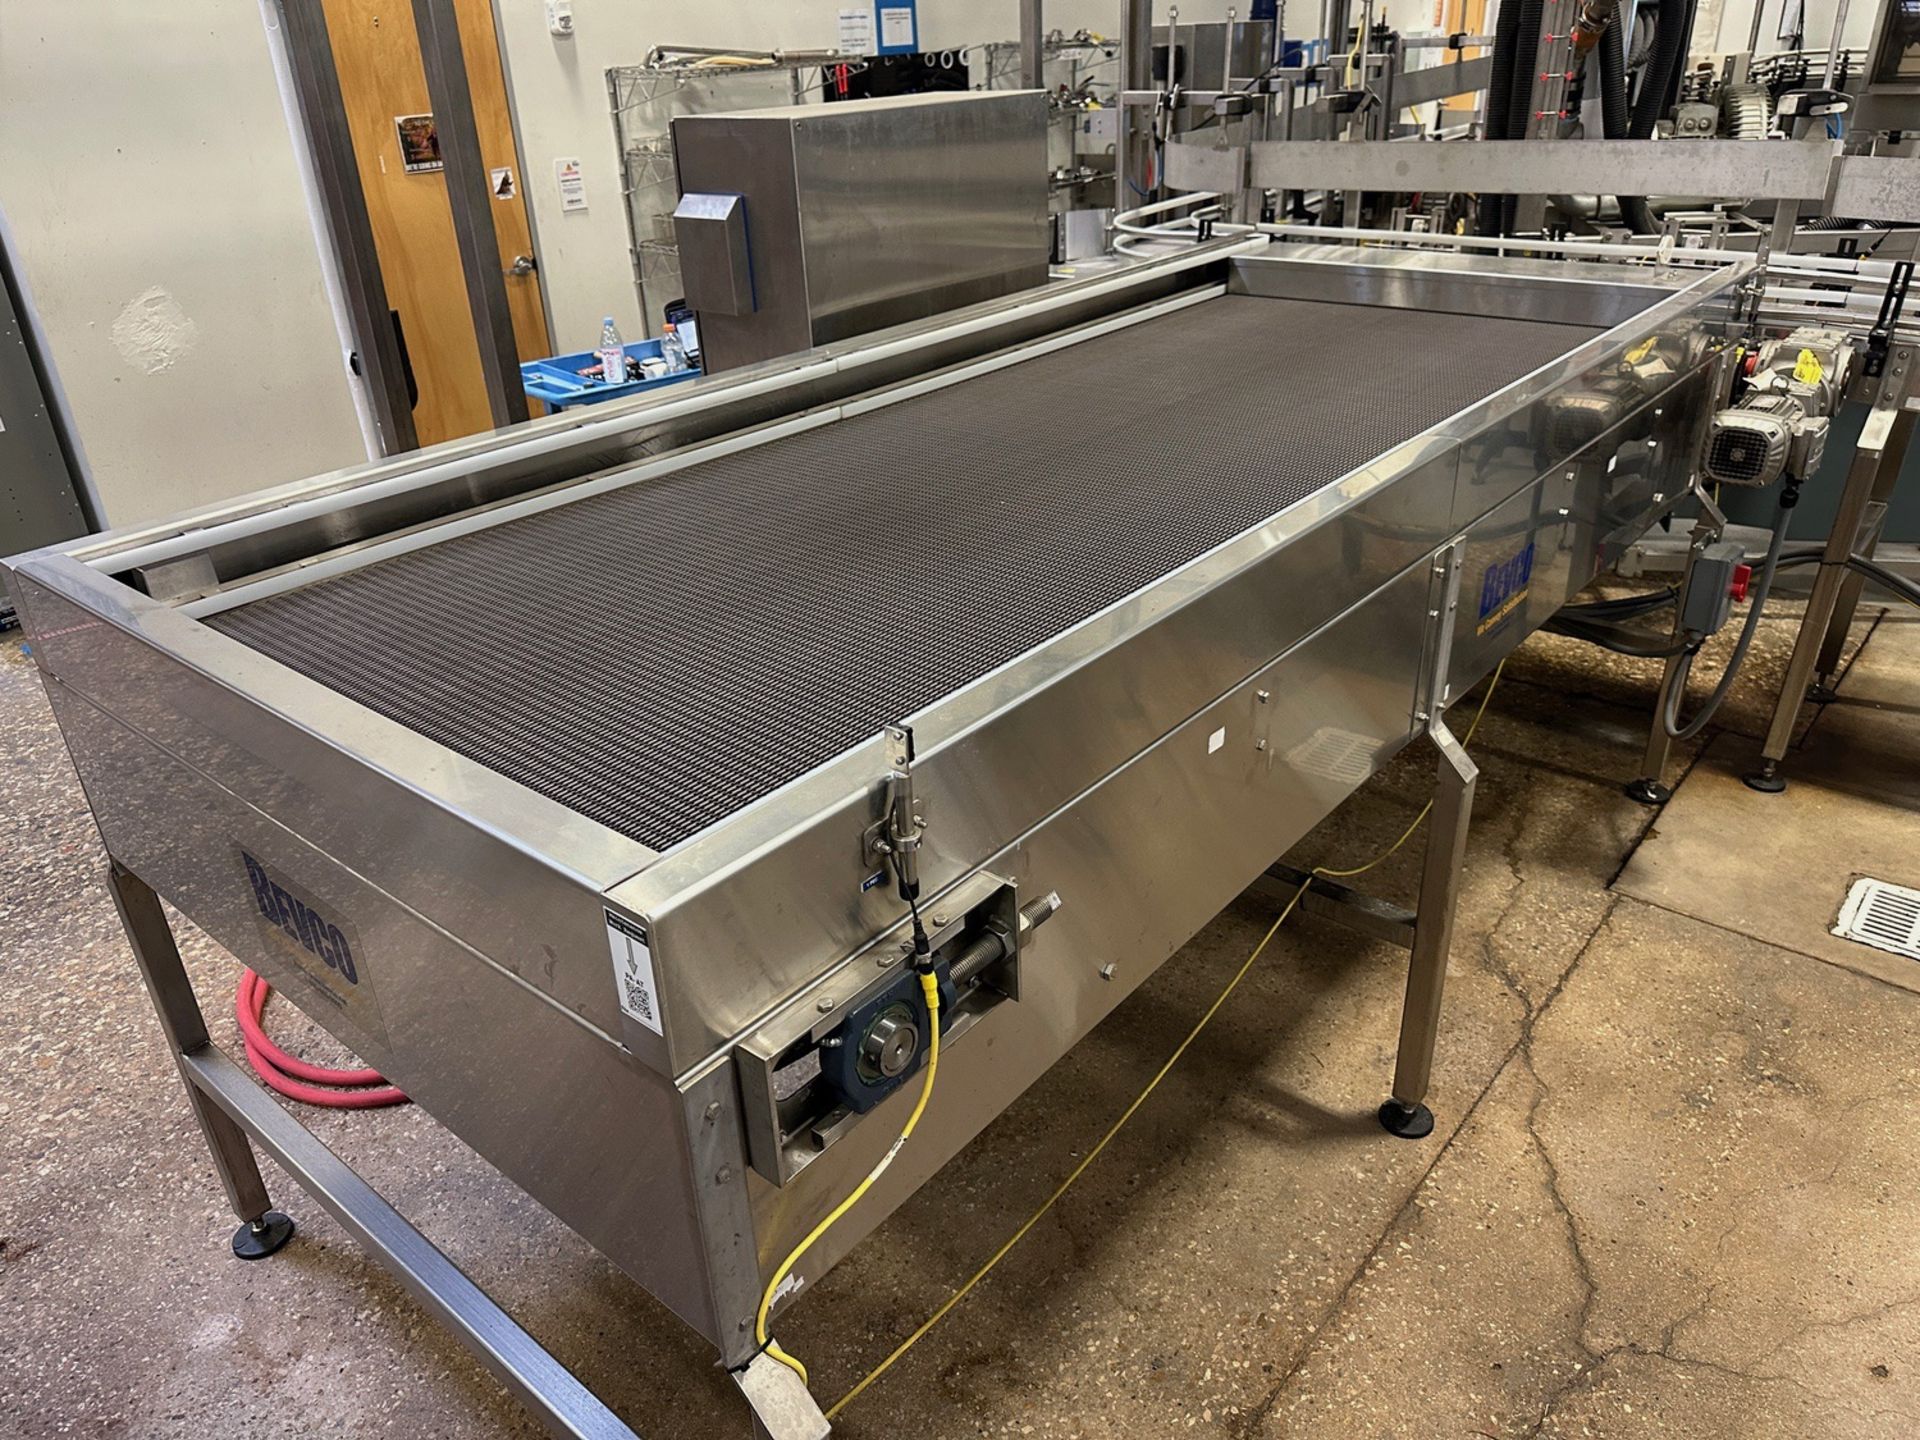 Bevco Accumulation Table over Stainless Steel Frame (Approx. 4' x 11') | Rig Fee $750 - Image 2 of 4